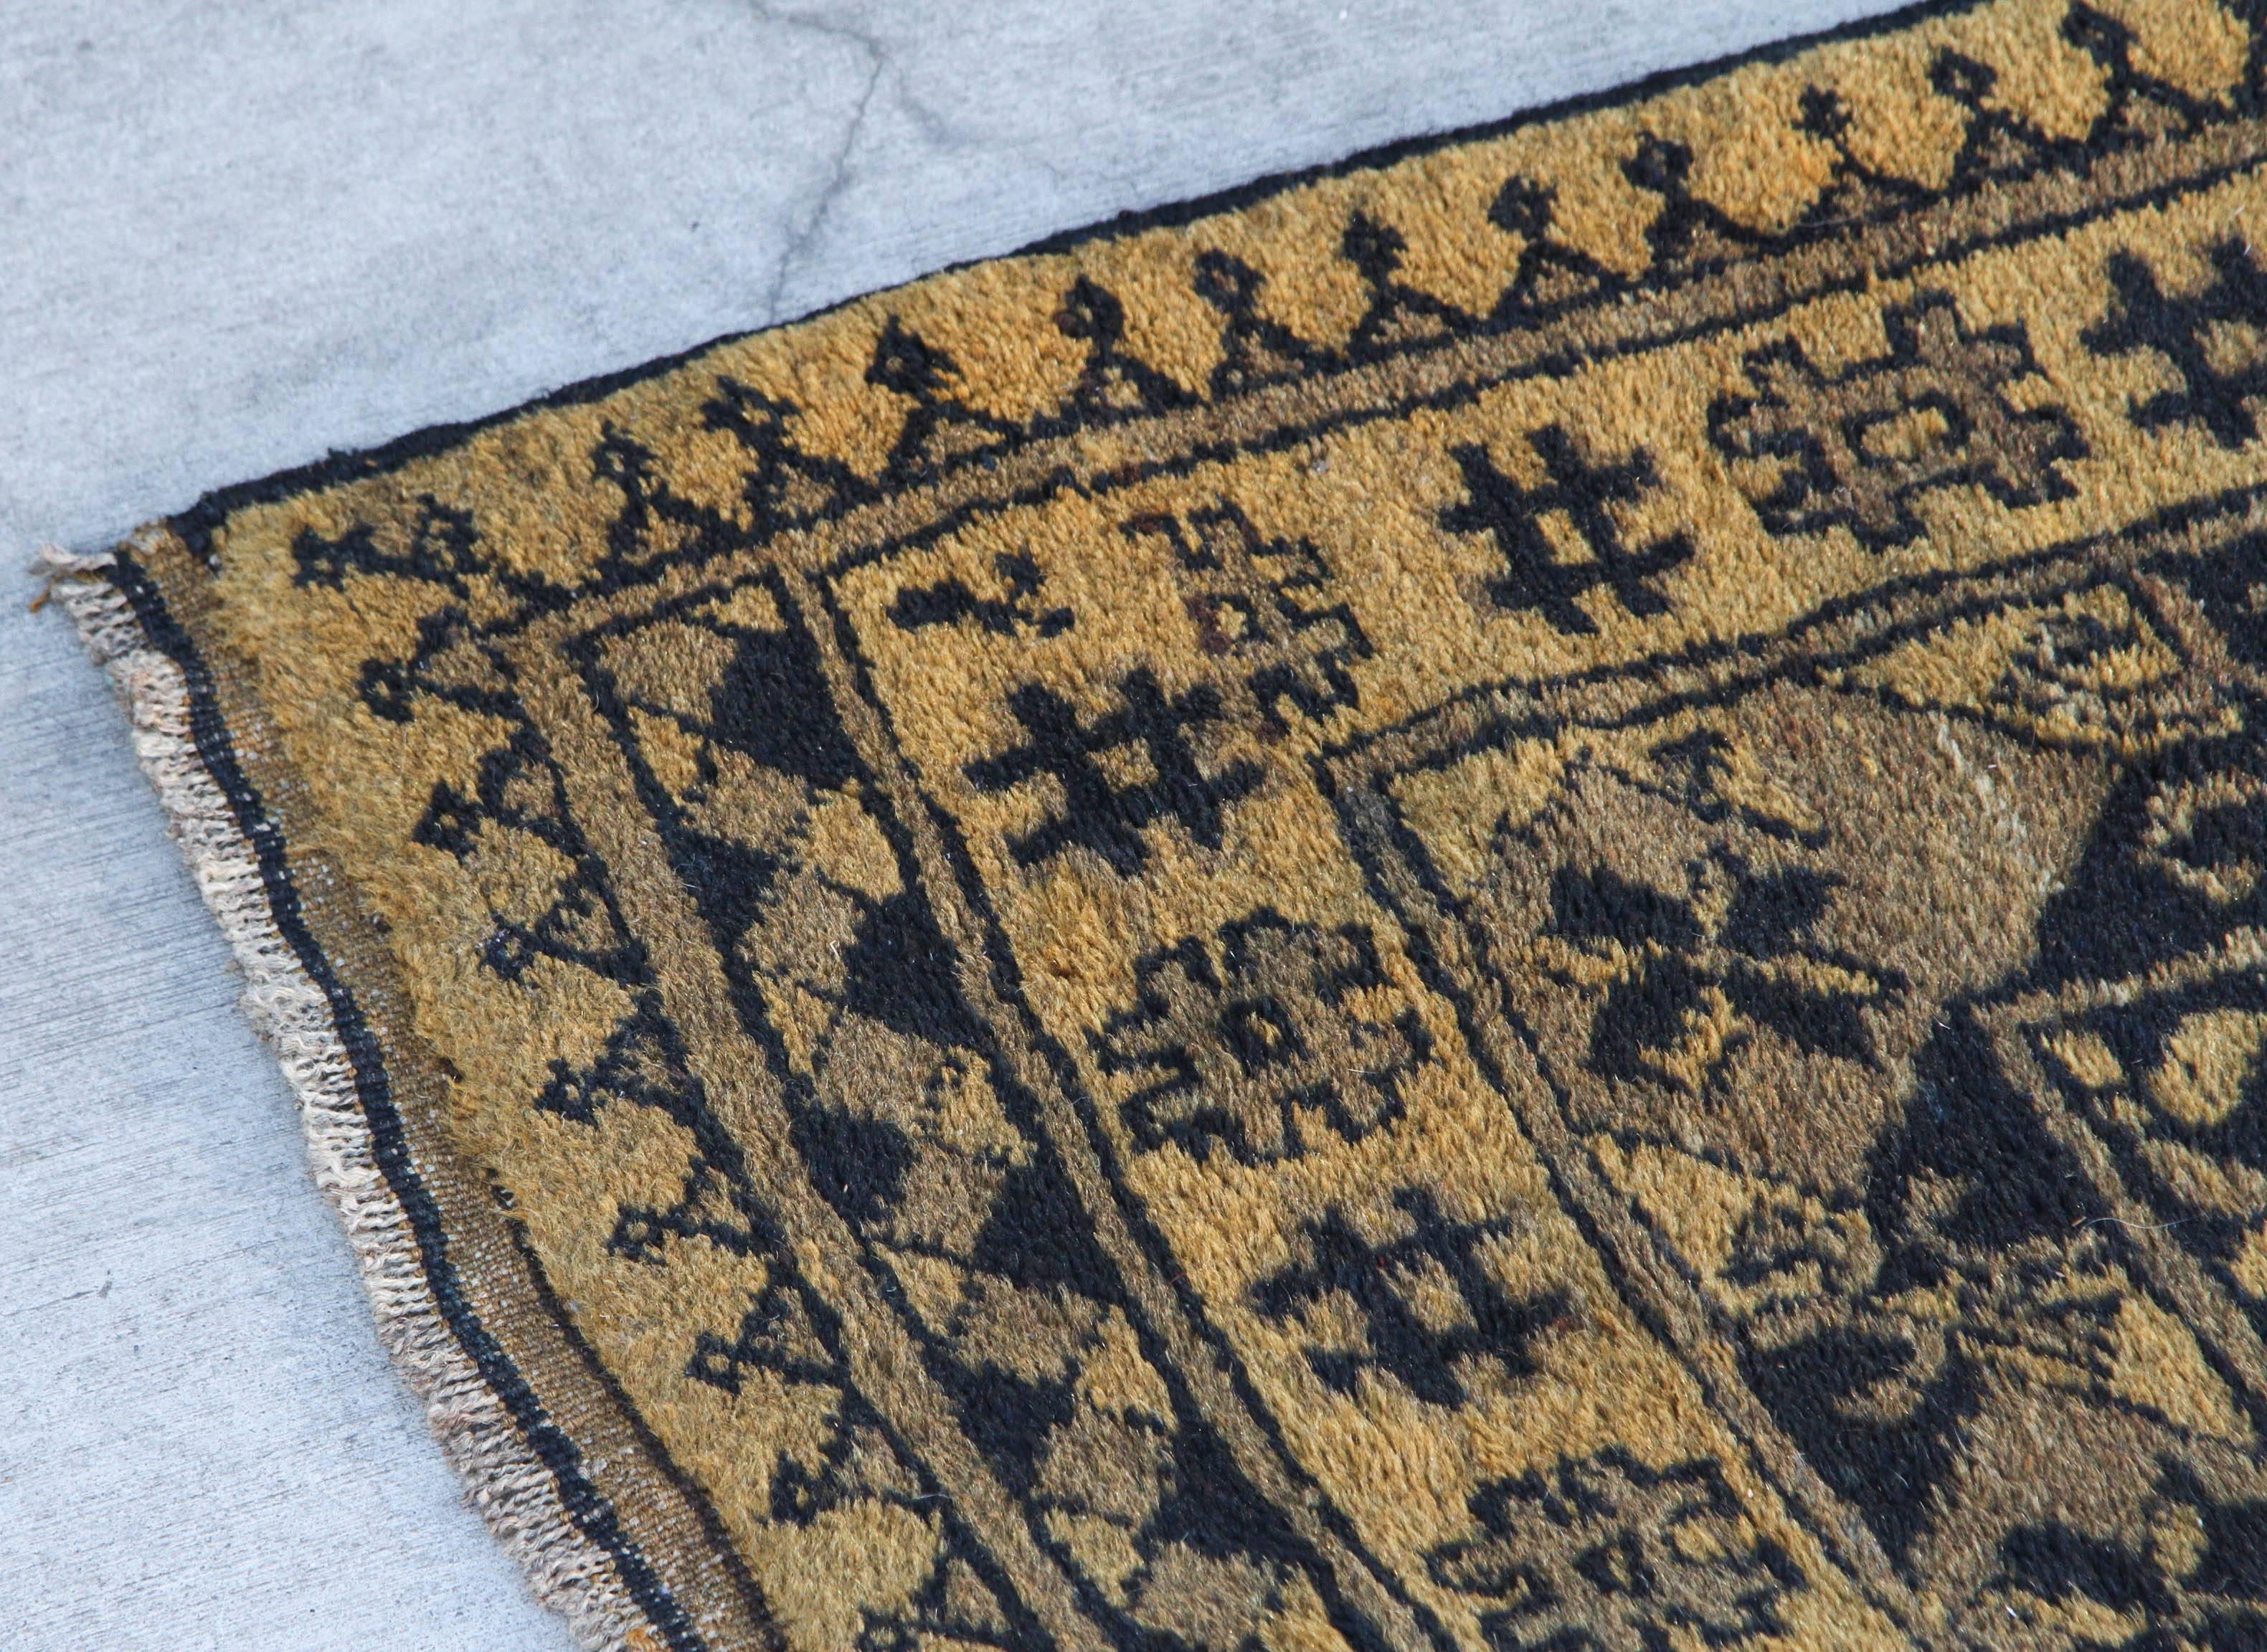 Camel colored Afghan rug with black tribal print. Afghan rugs are handwoven floor-covering textile traditionally made in Afghanistan.